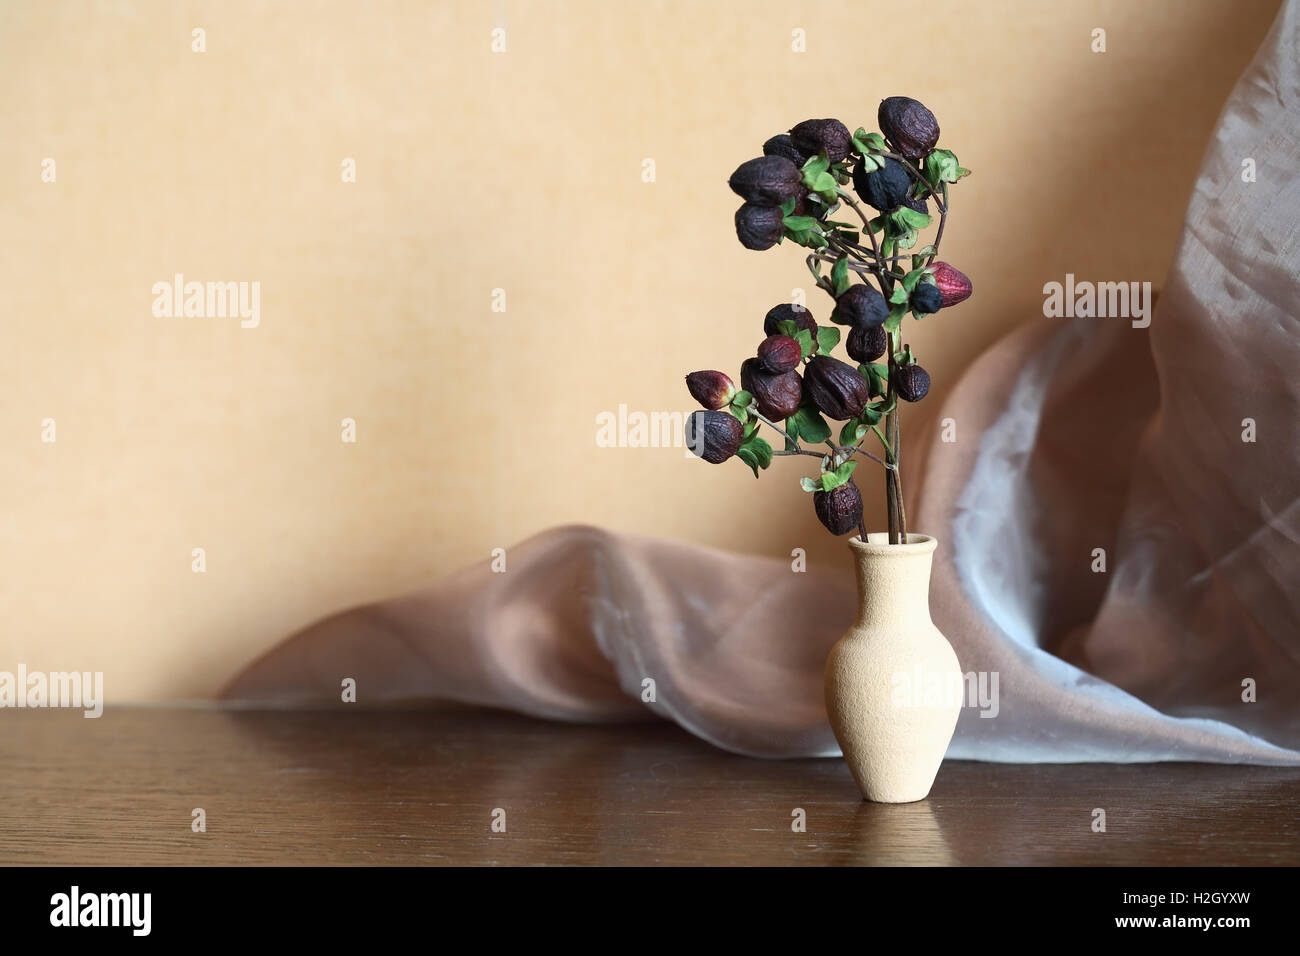 Nice dry plant with berries in elegance clay vase Stock Photo